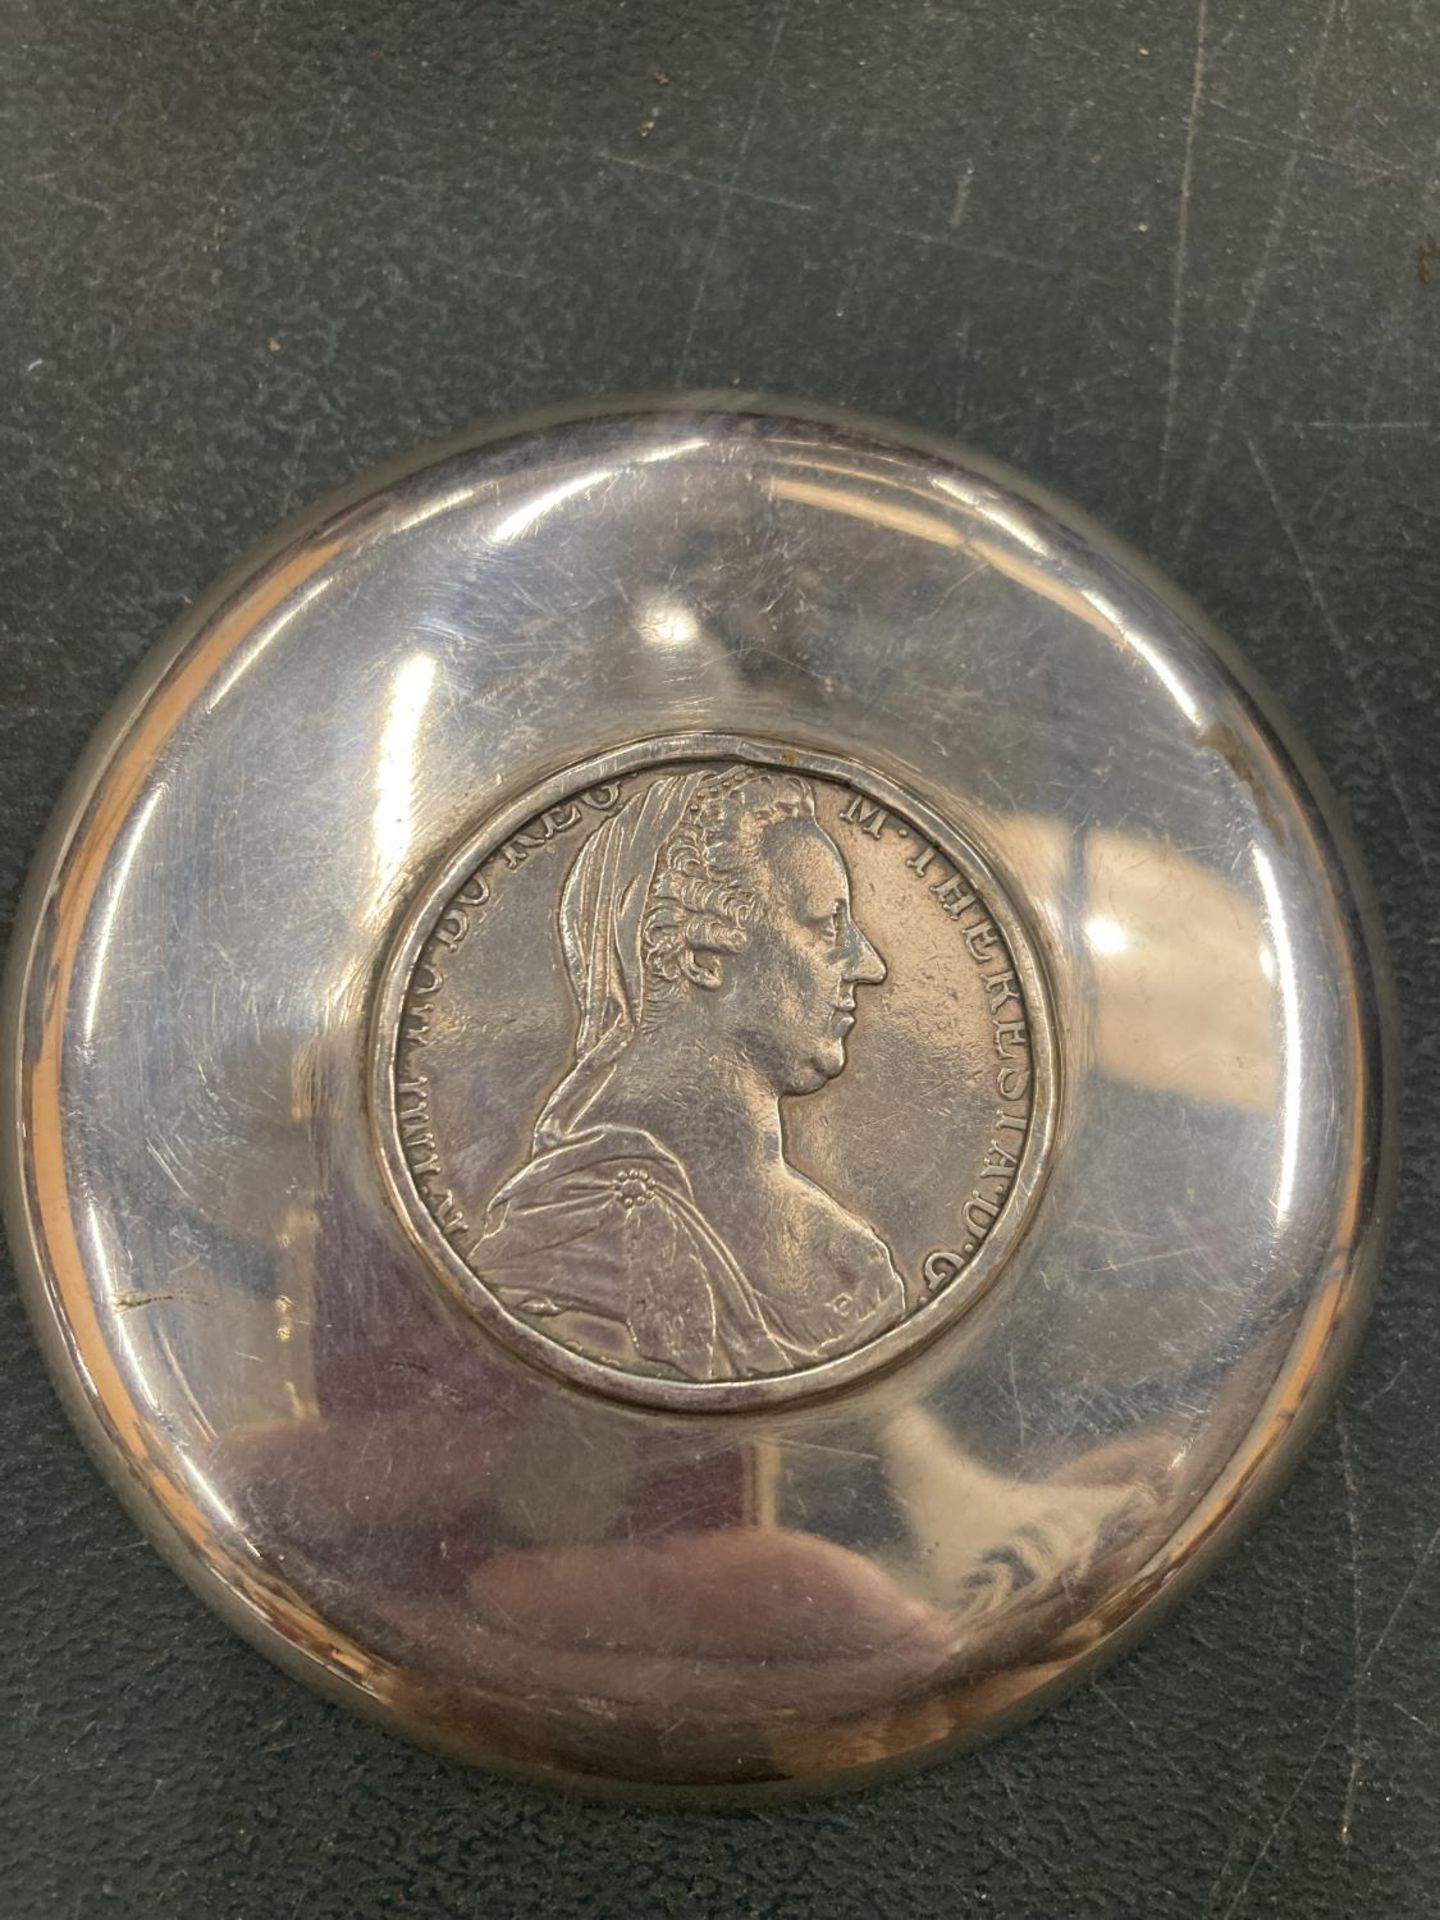 A DISH WITH A COIN STYLE INSERT - Image 3 of 3